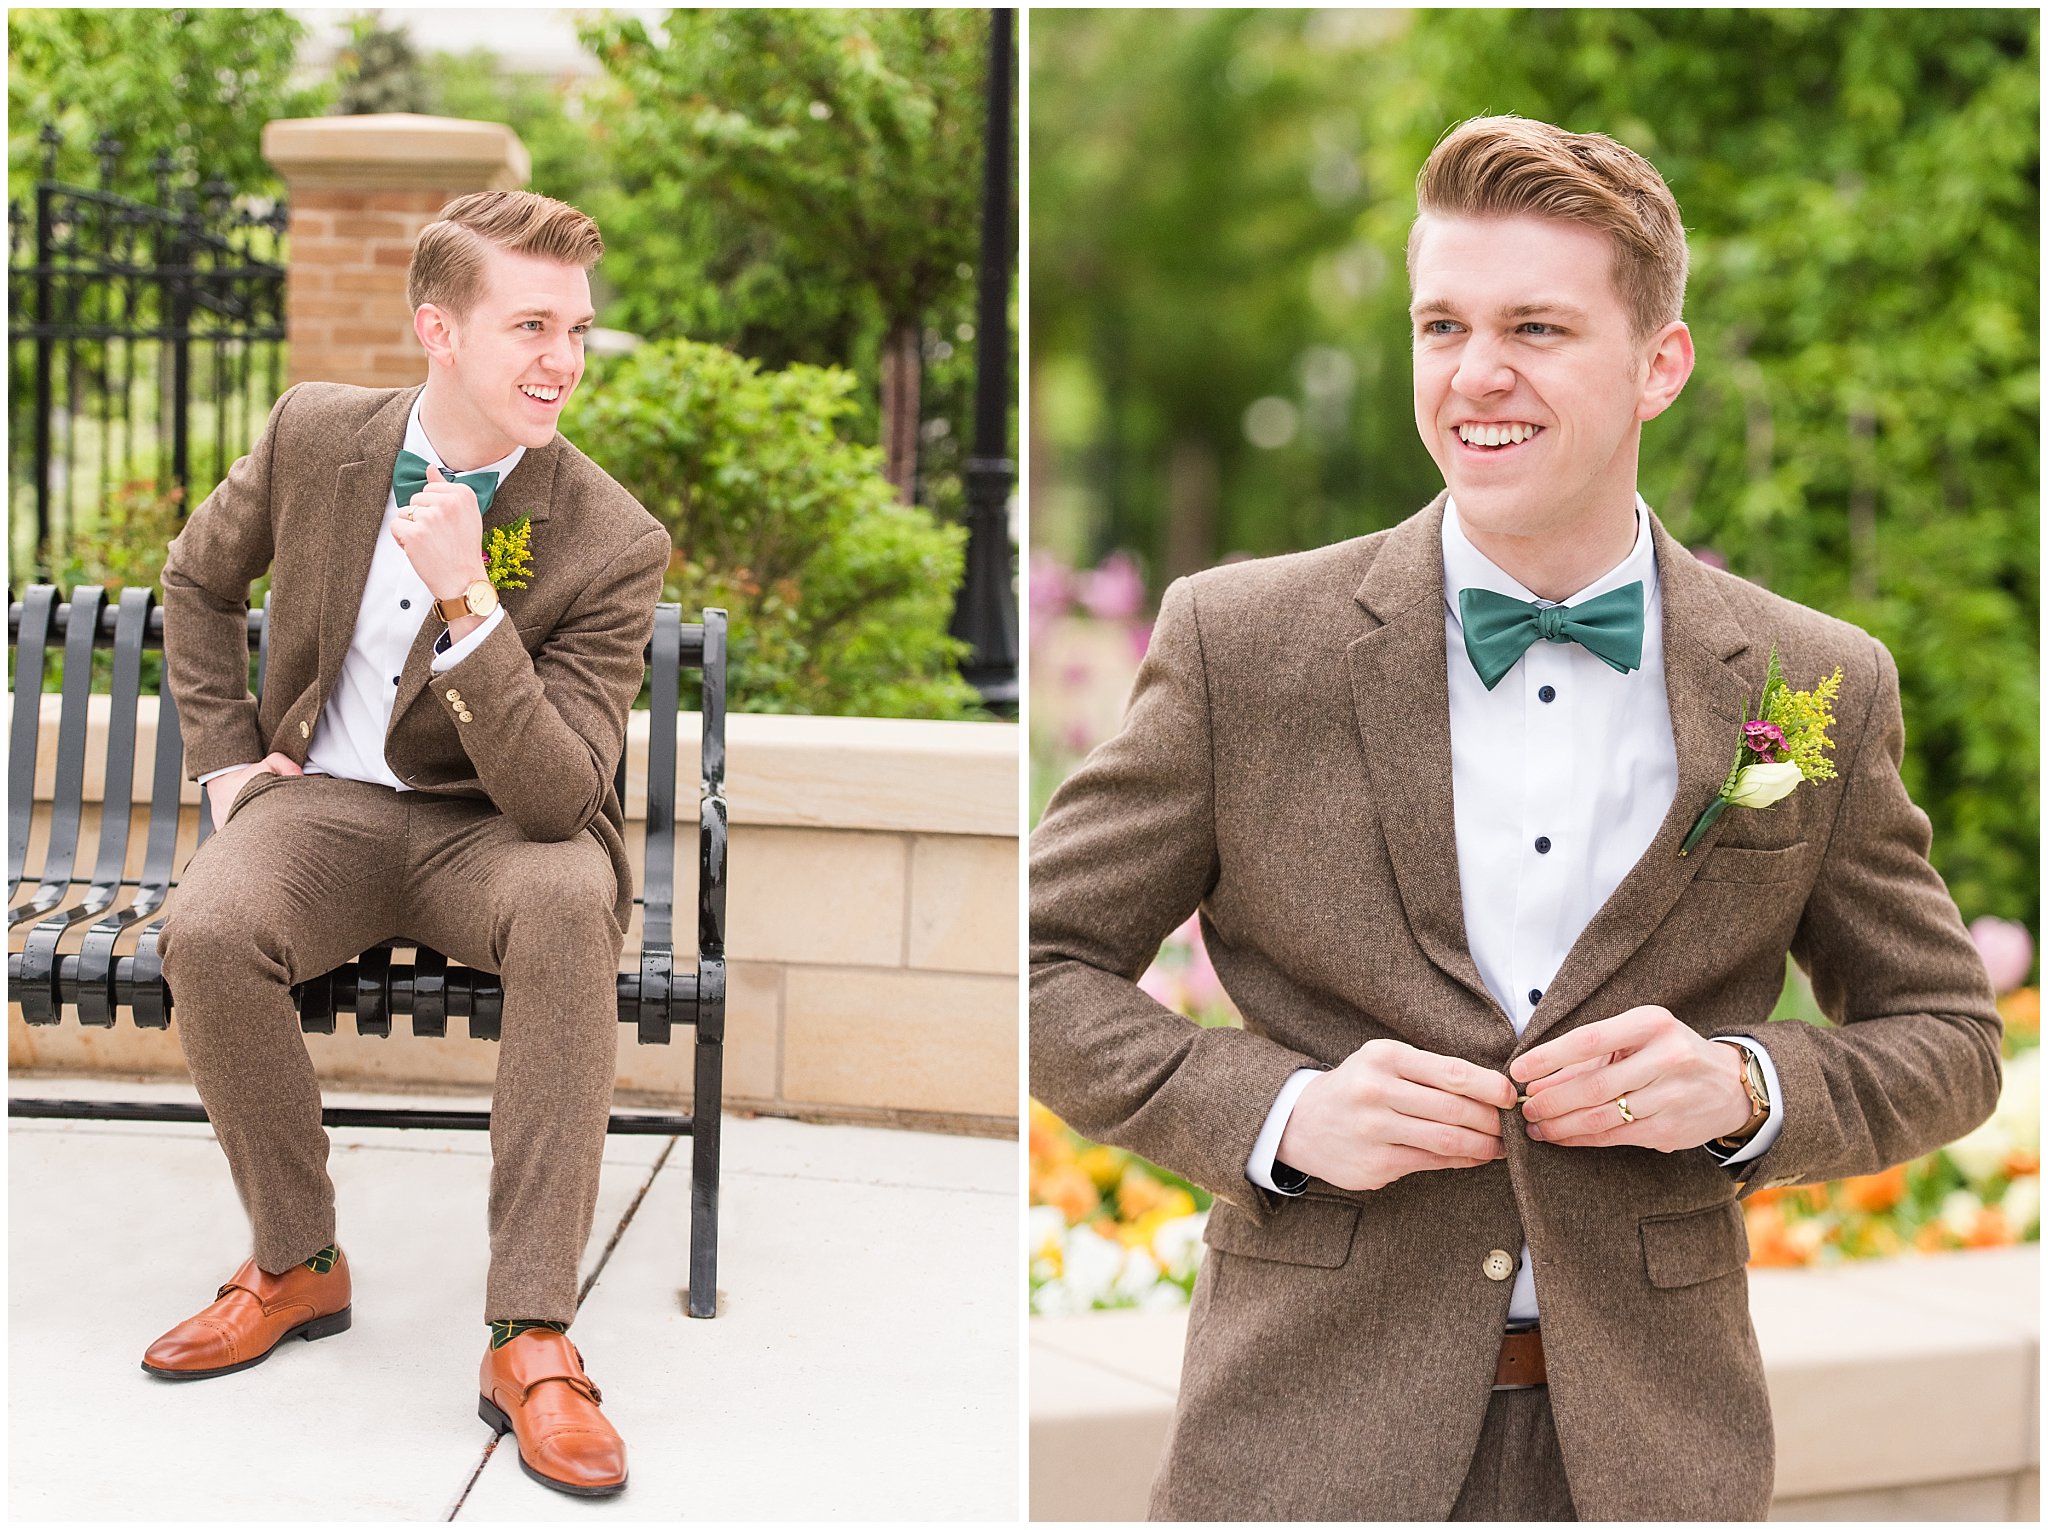 Groom wearing tweed suit and green bow tie for vintage inspired wedding attire | Emerald green, gold wedding colors | Provo City Center Temple Spring Formal Session | Jessie and Dallin Photography